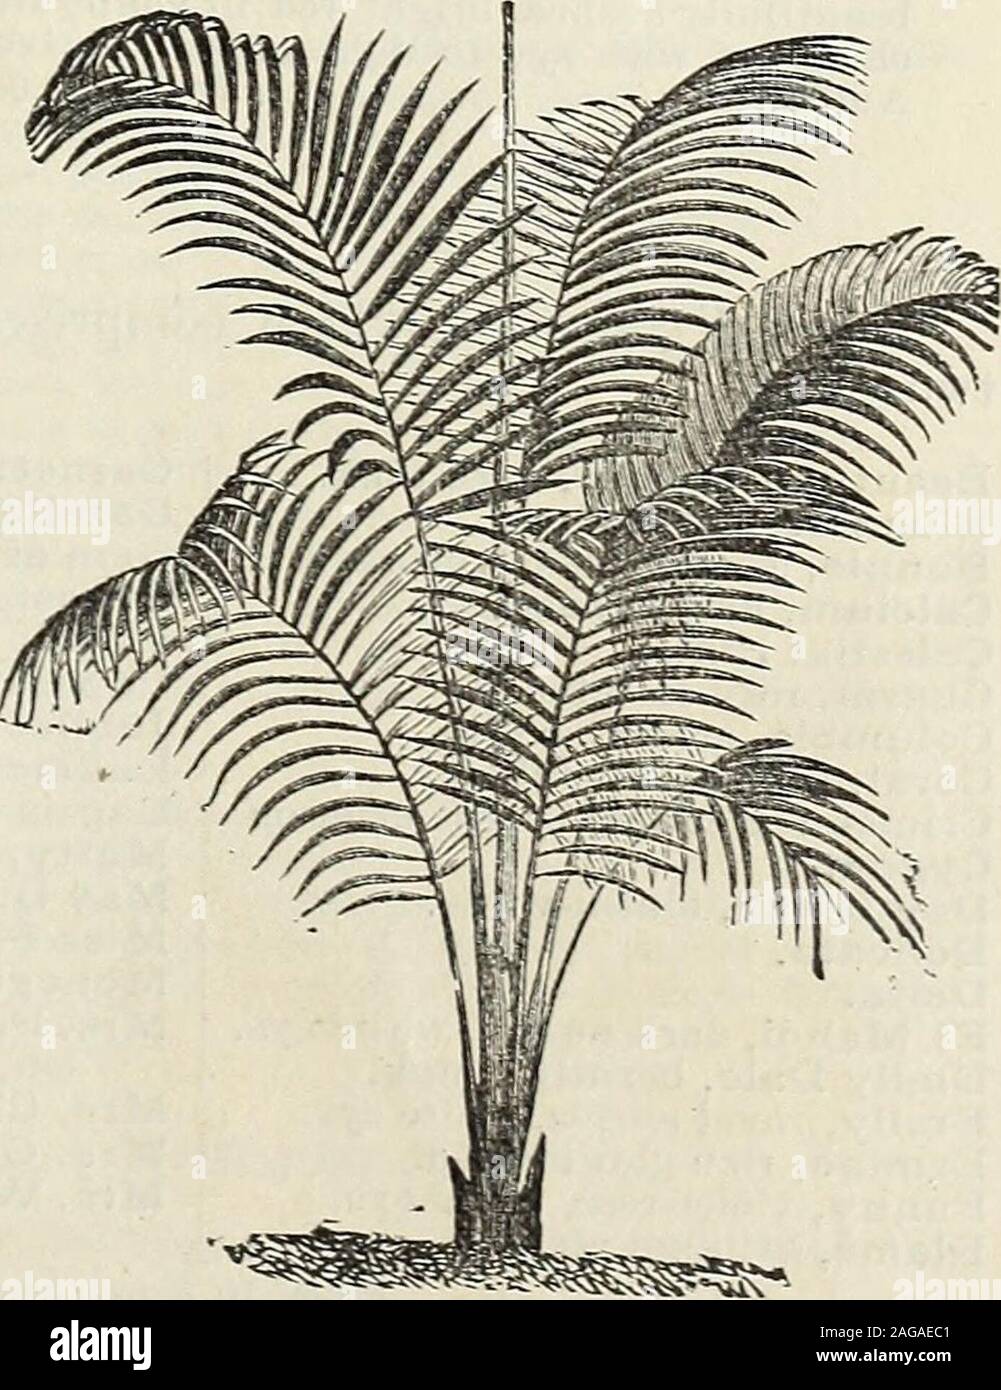 . John Saul's catalogue of plants for the spring of 1889. WASHINGTONIA ROBUSTA. ARECA LUTESCENS. 56 JOHN SAULS DESCRIPTITE CATALOGUE Each.*Seaforthia Elegans, this is a most gracefulPalm emineutiy adapted for the decoration ofthe greenhouse and garden. It also makes afine window plant; leaves are very long andgracefLilly arched, dark green, the whole plantperfectly smooth, a grand decorative plant.(See last page of cover) 30 cts. $1.50 to 2 50 Each.*Trinax Argentea, a very beautiful dwarf Palm, leaves fan-shaped, very handsome..30 c., 50 c. to 1 00*Elegans, a dwarf Palm, leaves fan-shaped ; it Stock Photo